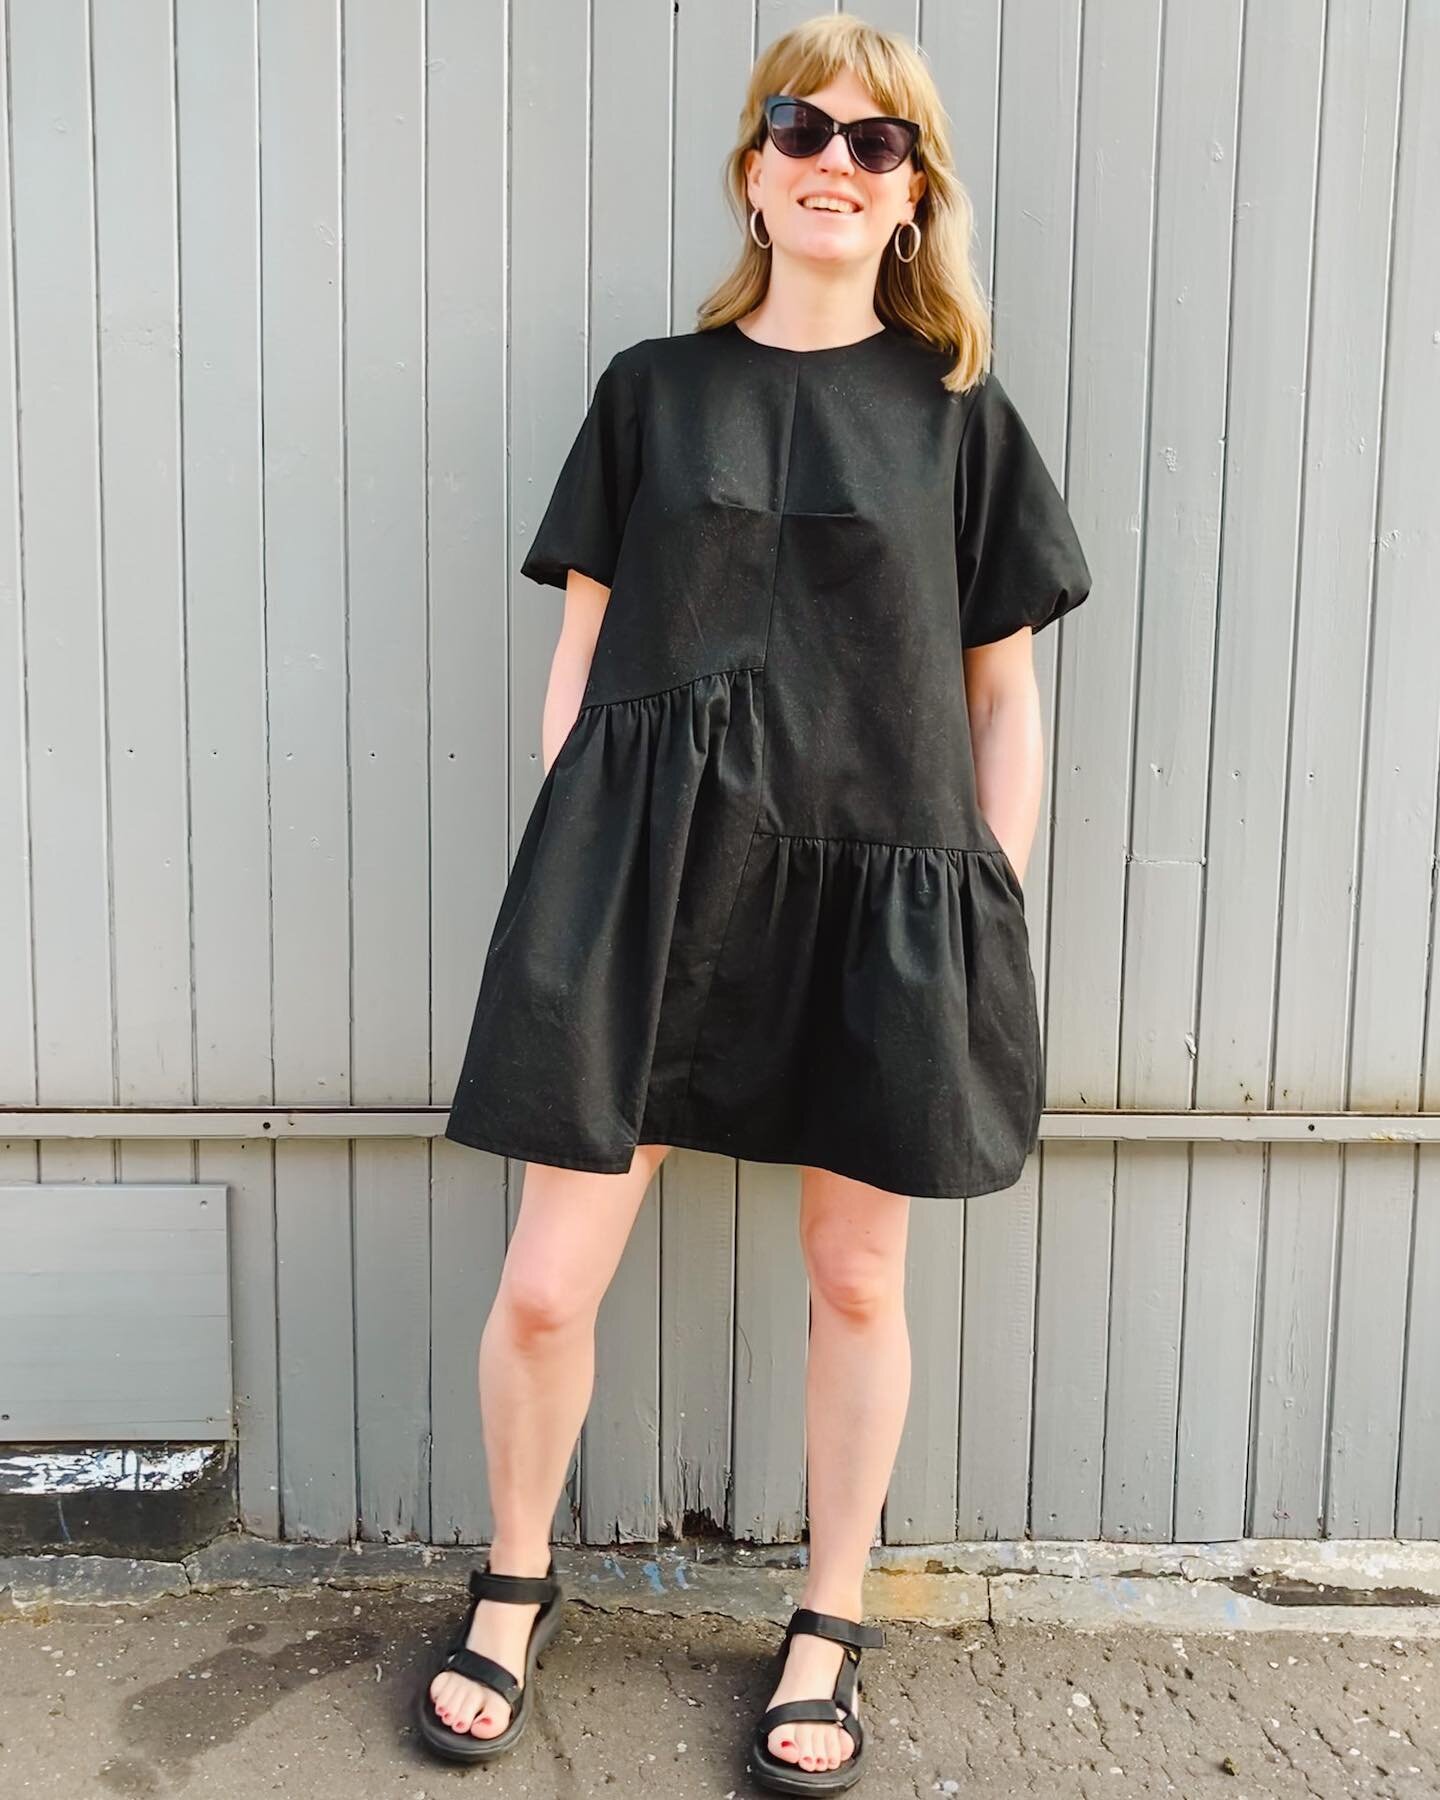 Summer in Scotland ✨
⠀⠀⠀⠀⠀⠀⠀⠀⠀
My little black Ingrid has been getting lots of wear this week. This one is sewn in a mid-weight brushed cotton, and is dreamy to wear in this heat 
Nic x
⠀⠀⠀⠀⠀⠀⠀⠀⠀
#hhIngrid #HandMadeWardrobe #ISewMyOwnClothes #indiePa